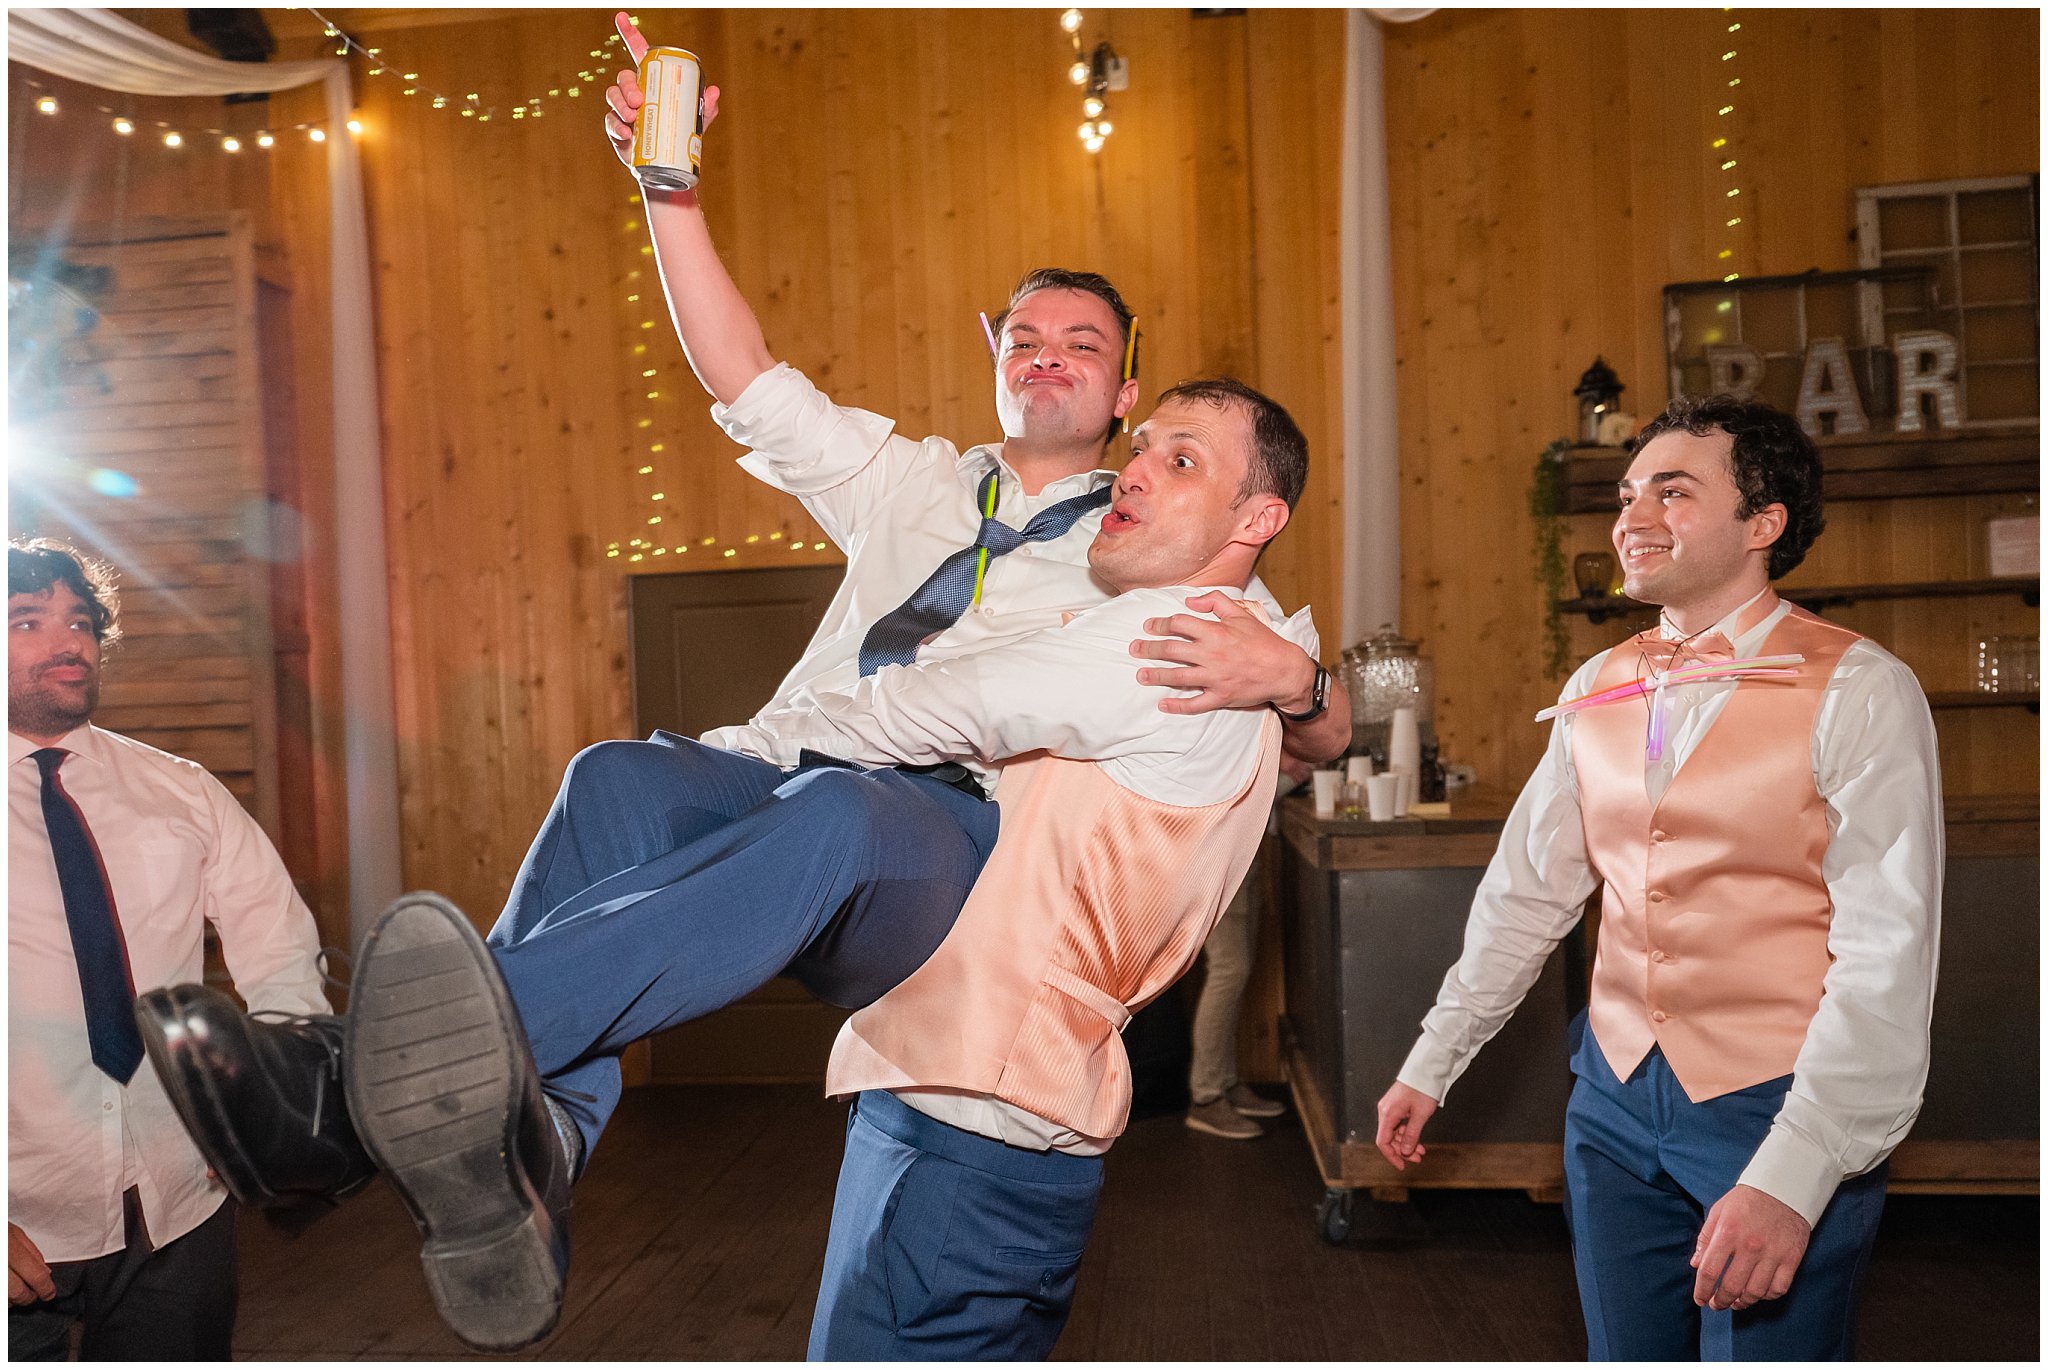 Reception party and dancing in barn | Oak Hills Utah Destination Wedding | Jessie and Dallin Photography